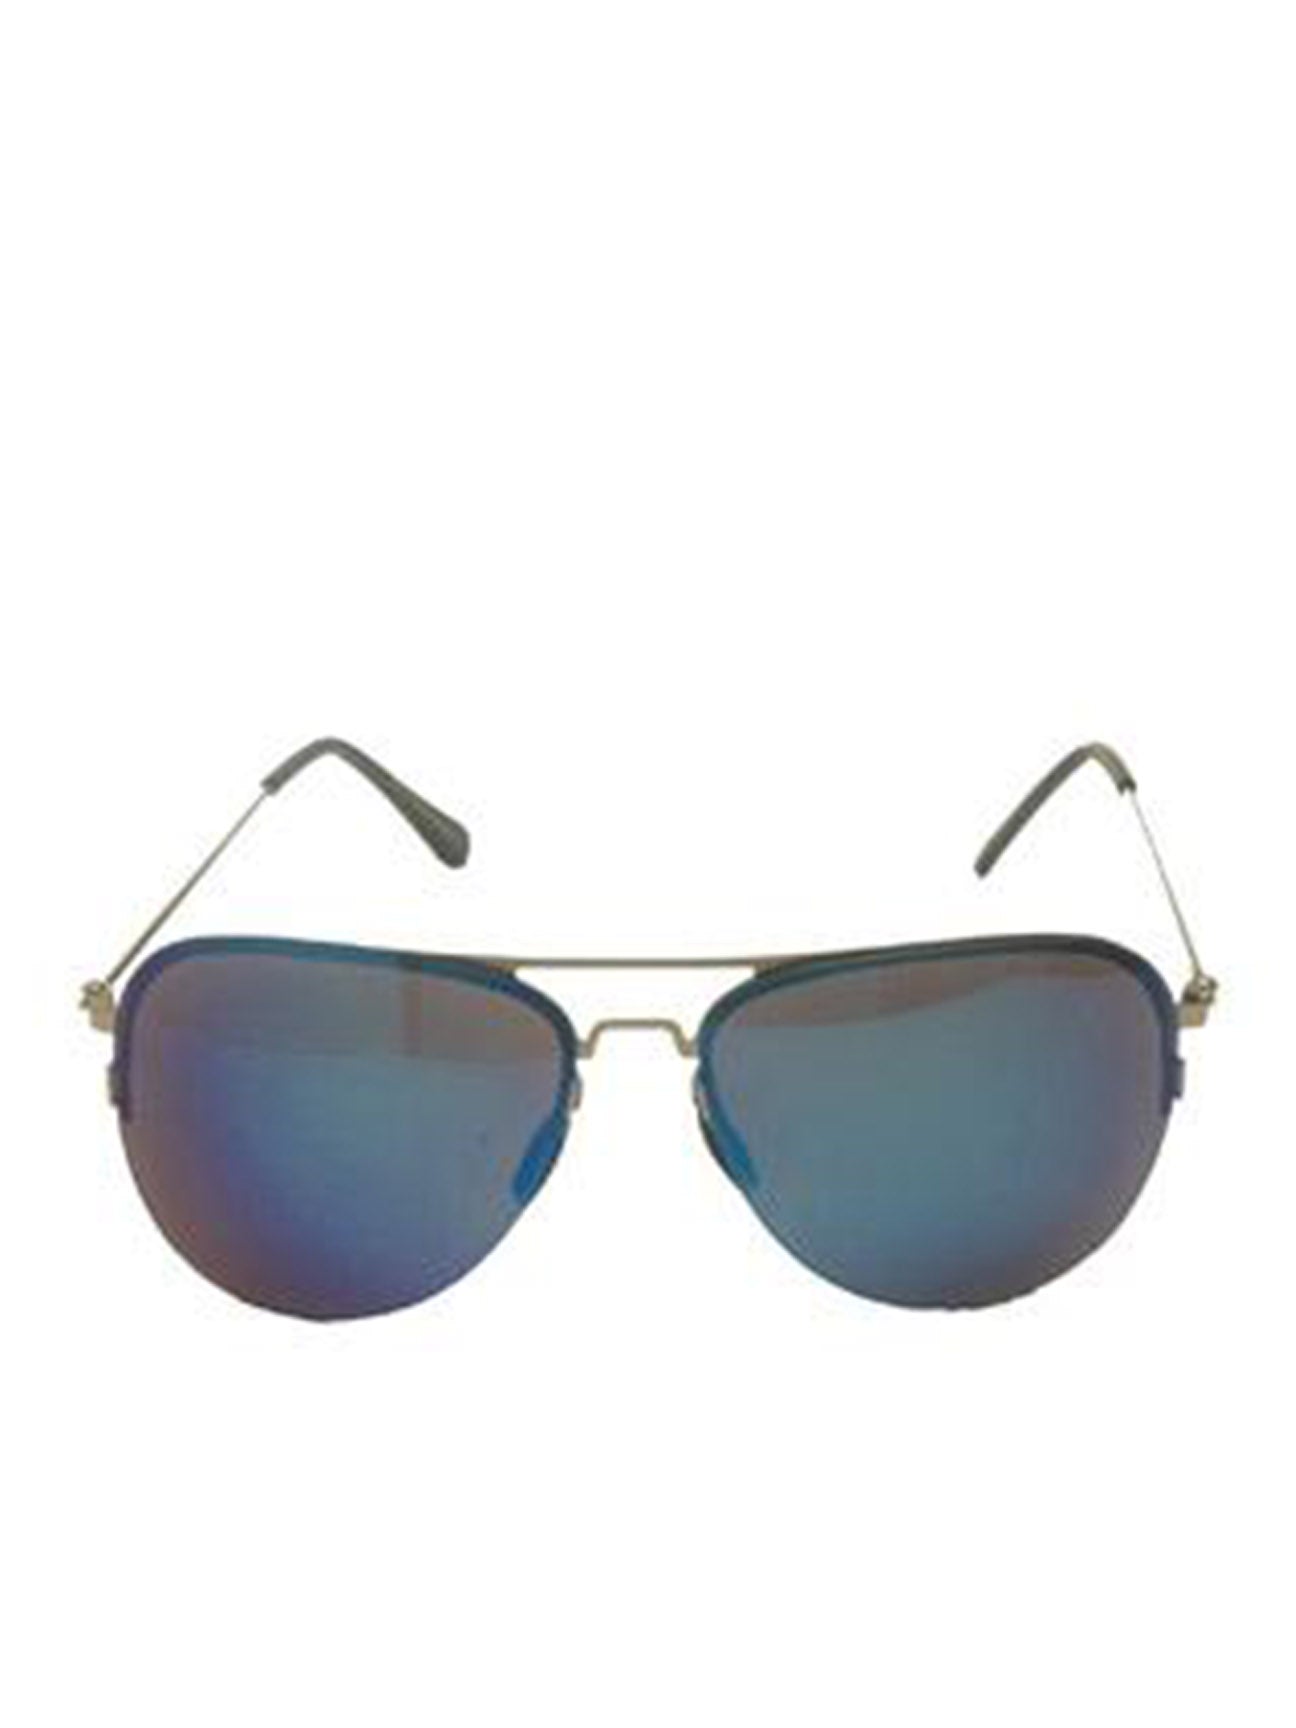 Silver Aviator Sunglasses with Blue Mirrored Lenses